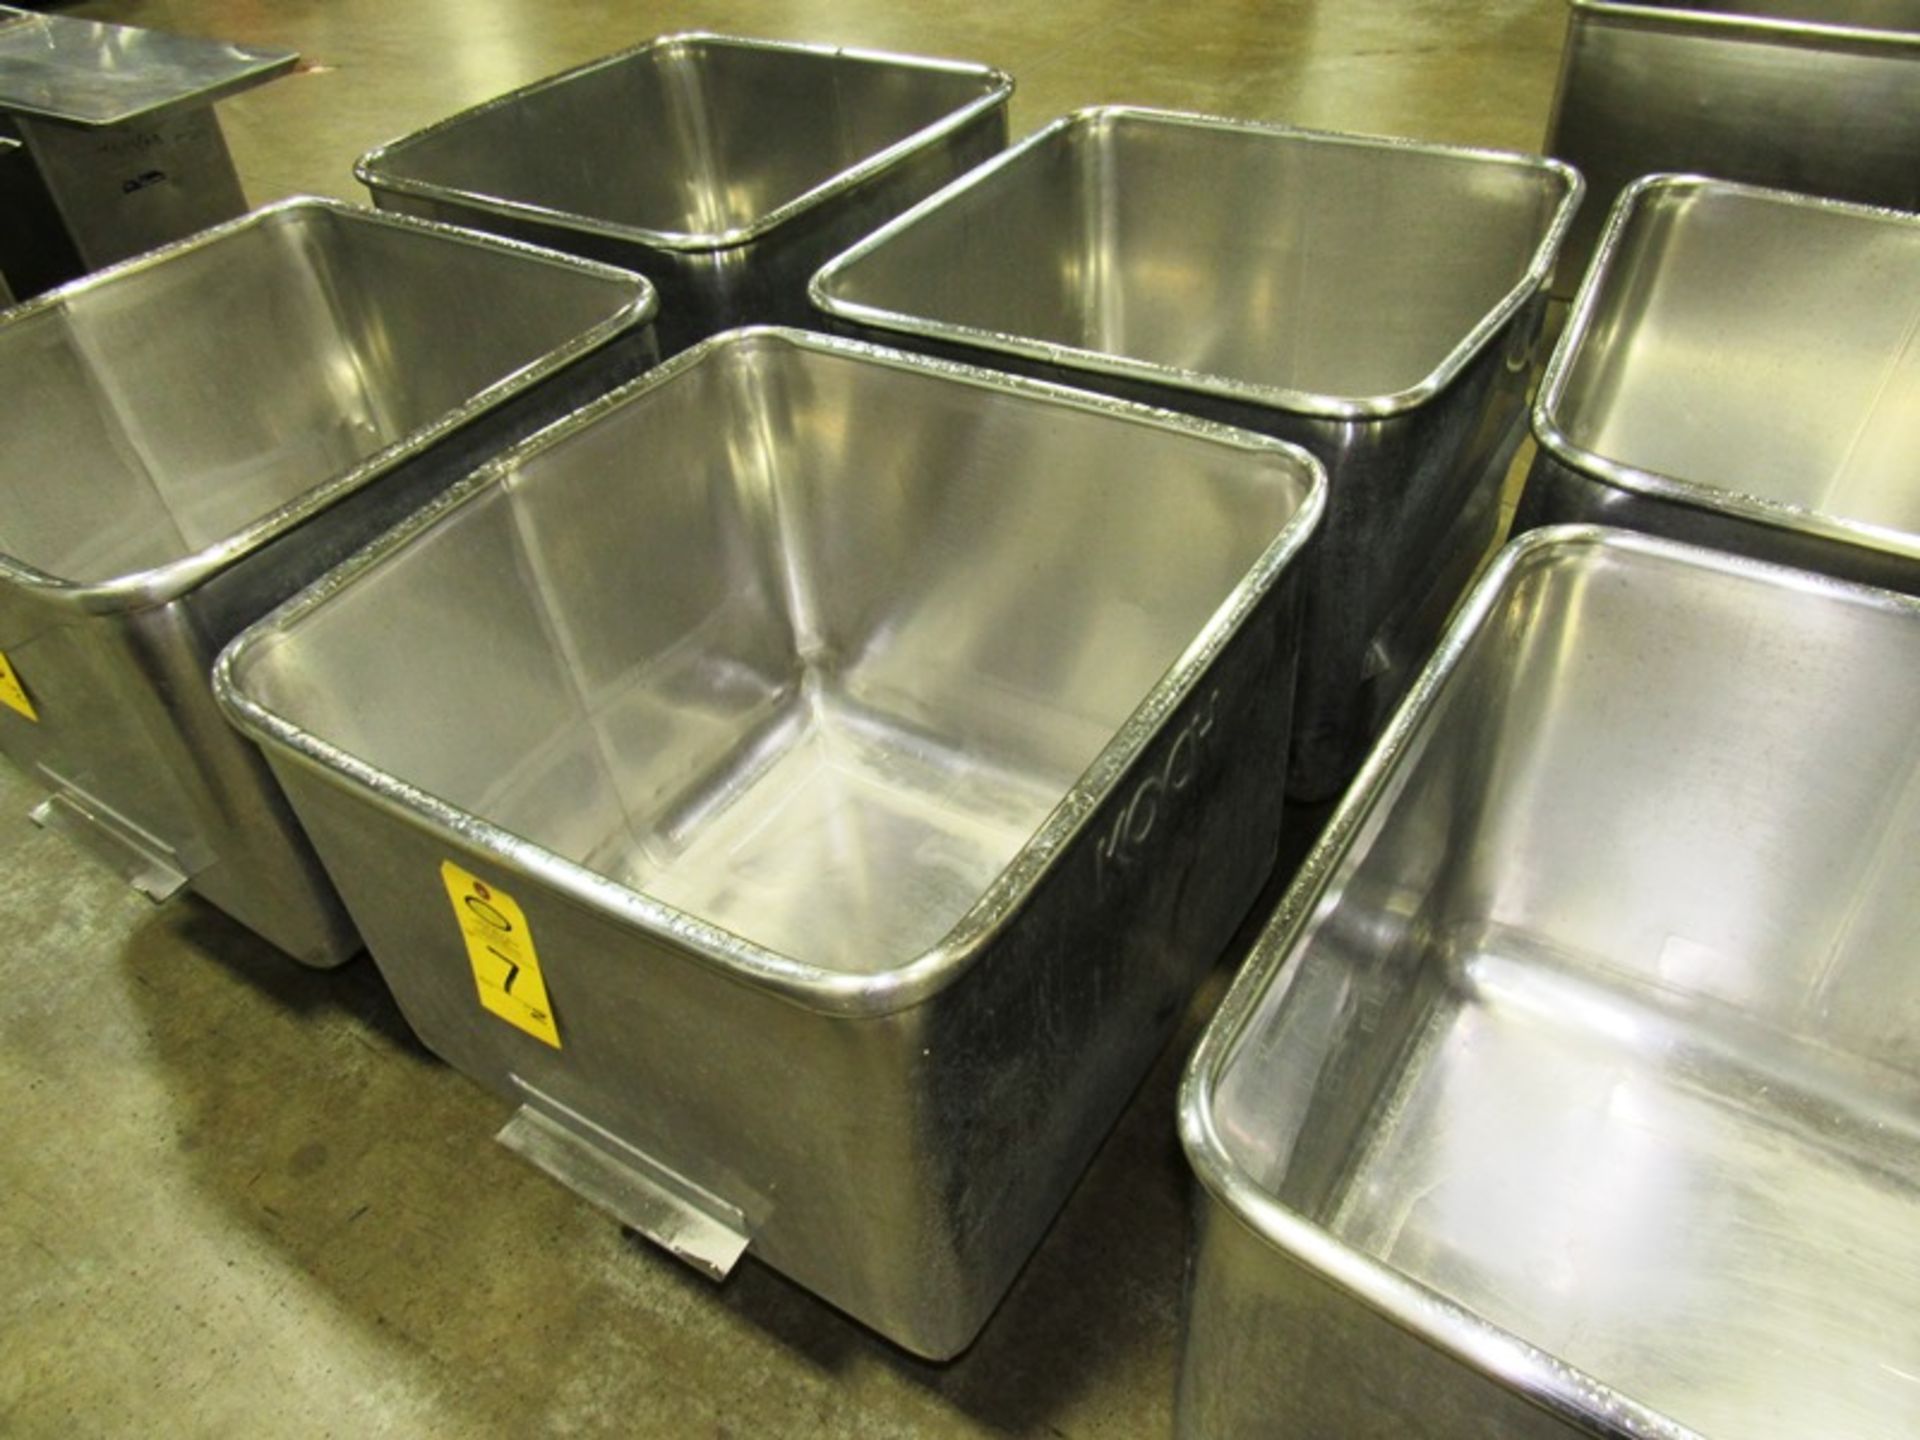 Stainless Steel Dump Buggies, 400 Lb. capacity (Removal Begins July 5th) Loading Fee $35 Rigger: